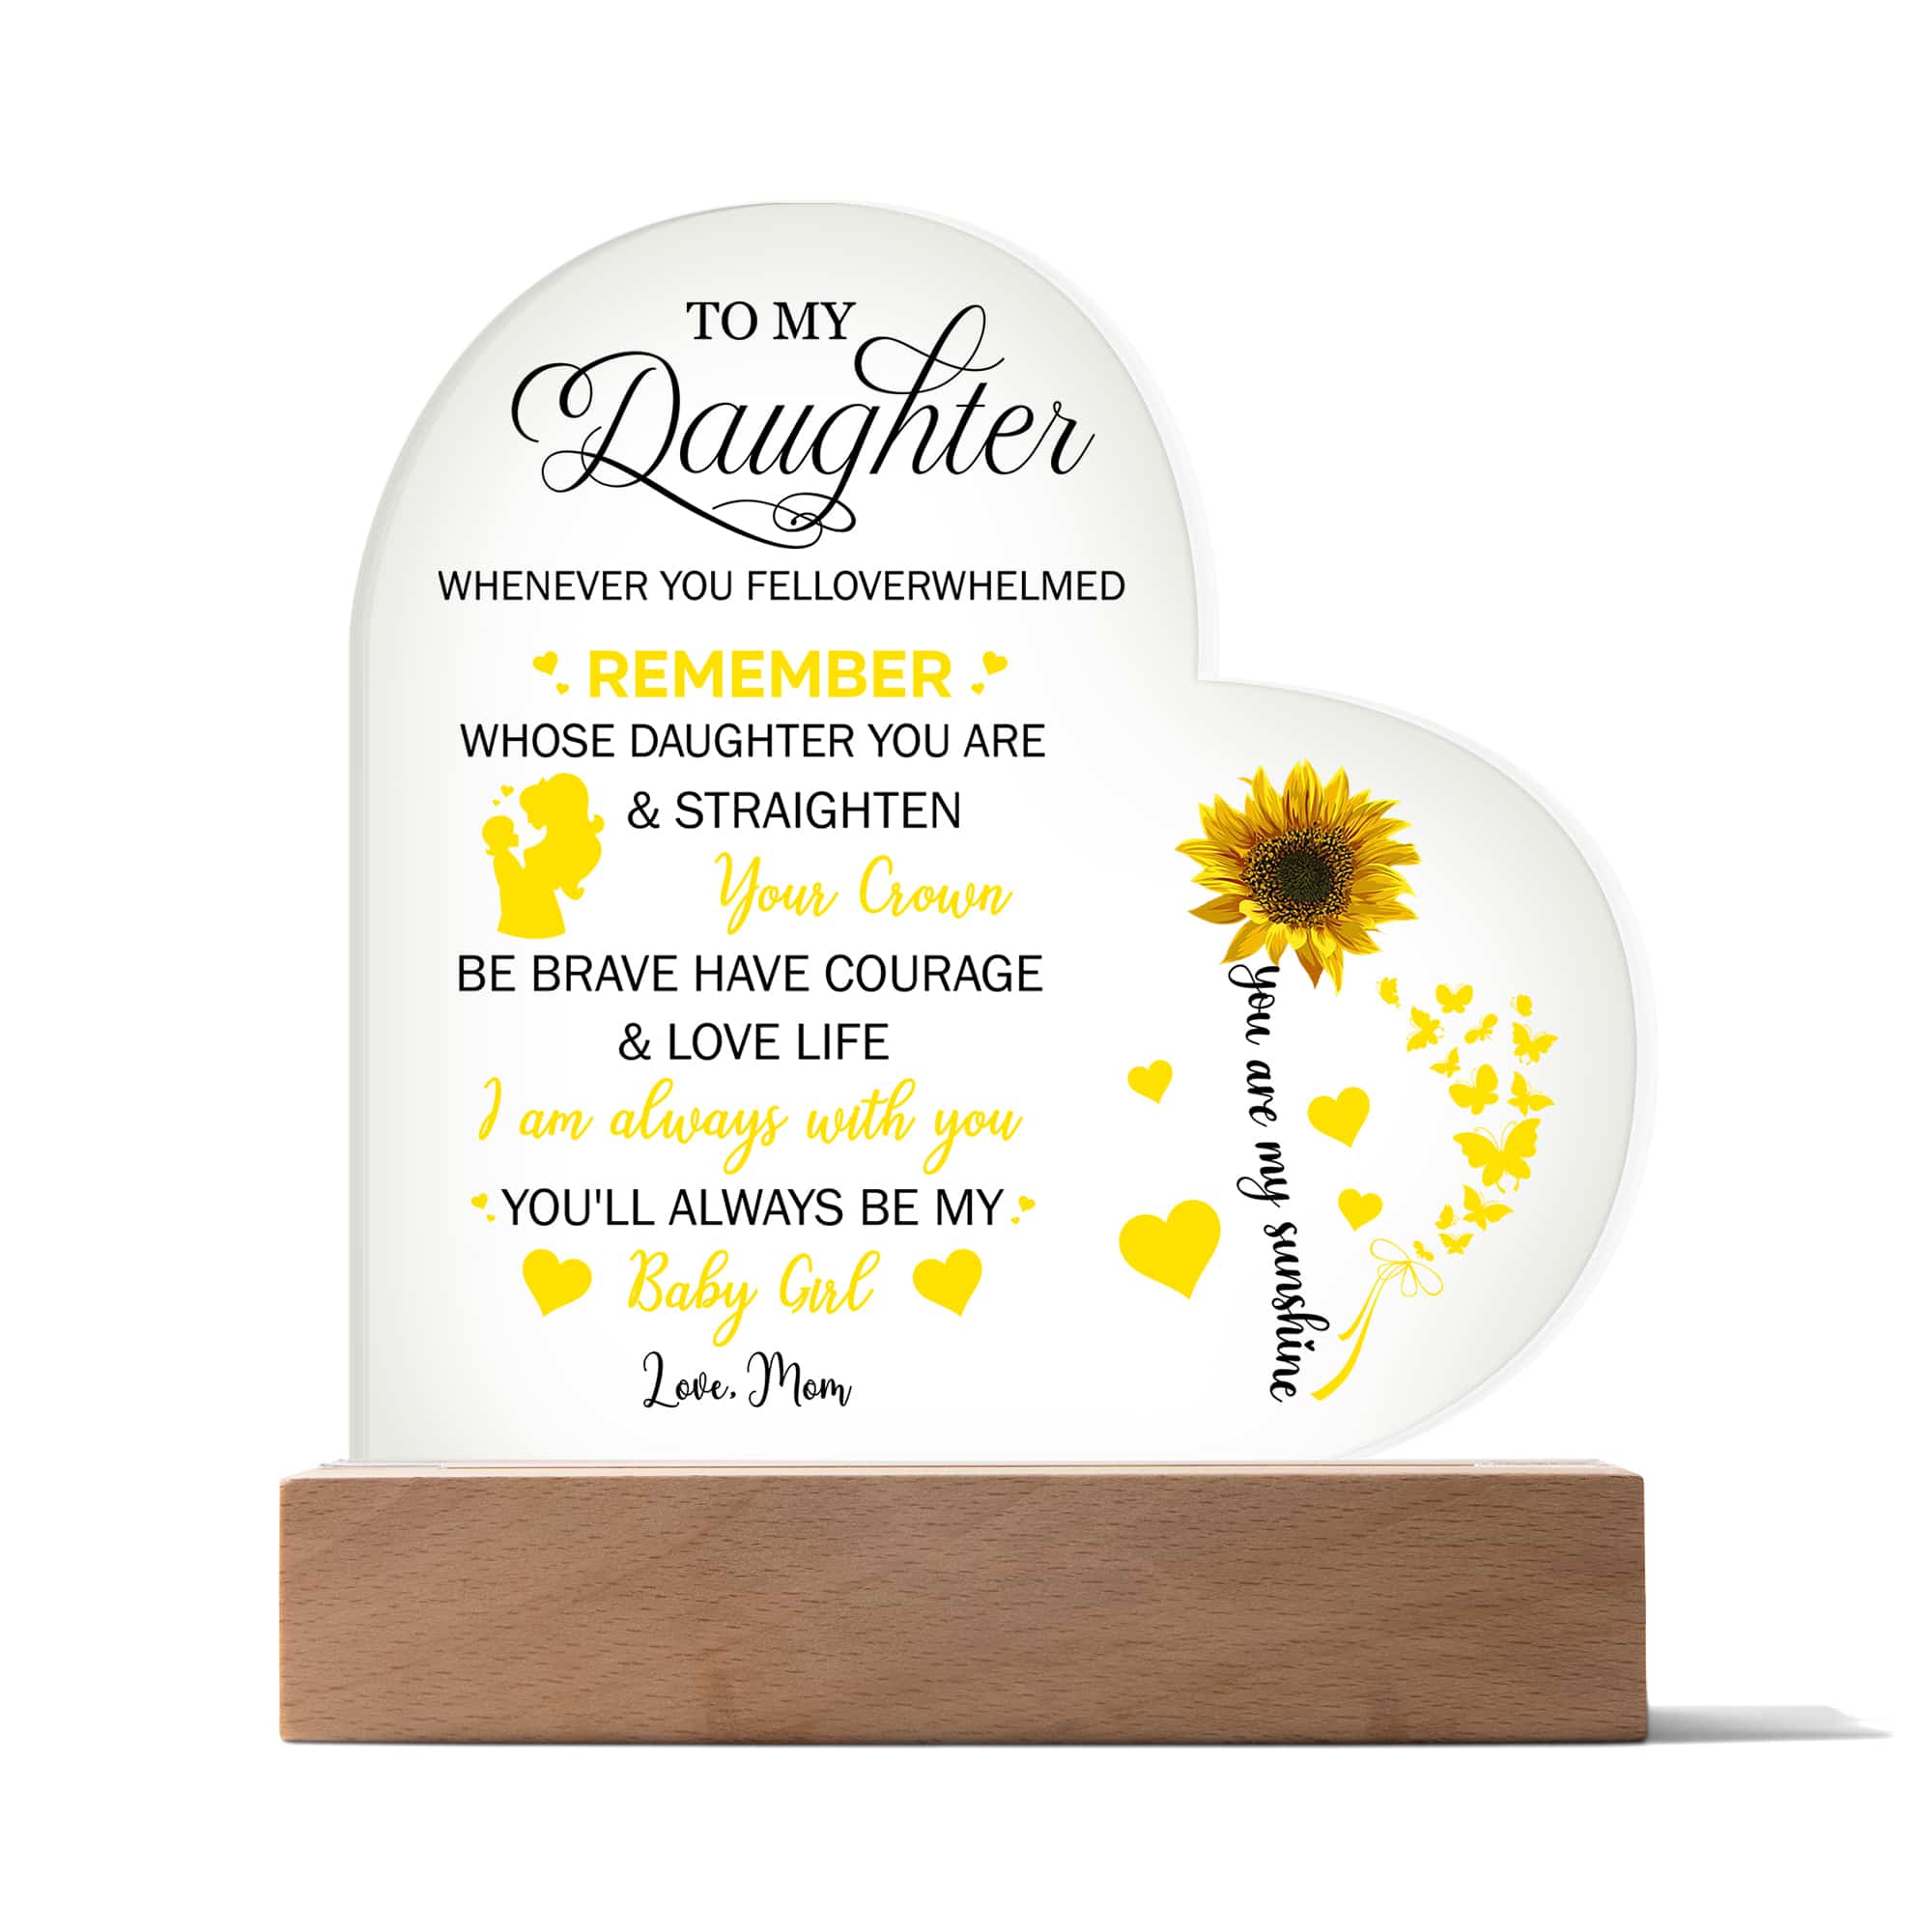 Acrylic Heart Plaque For Your Courageous Daughter - FavoJewelry